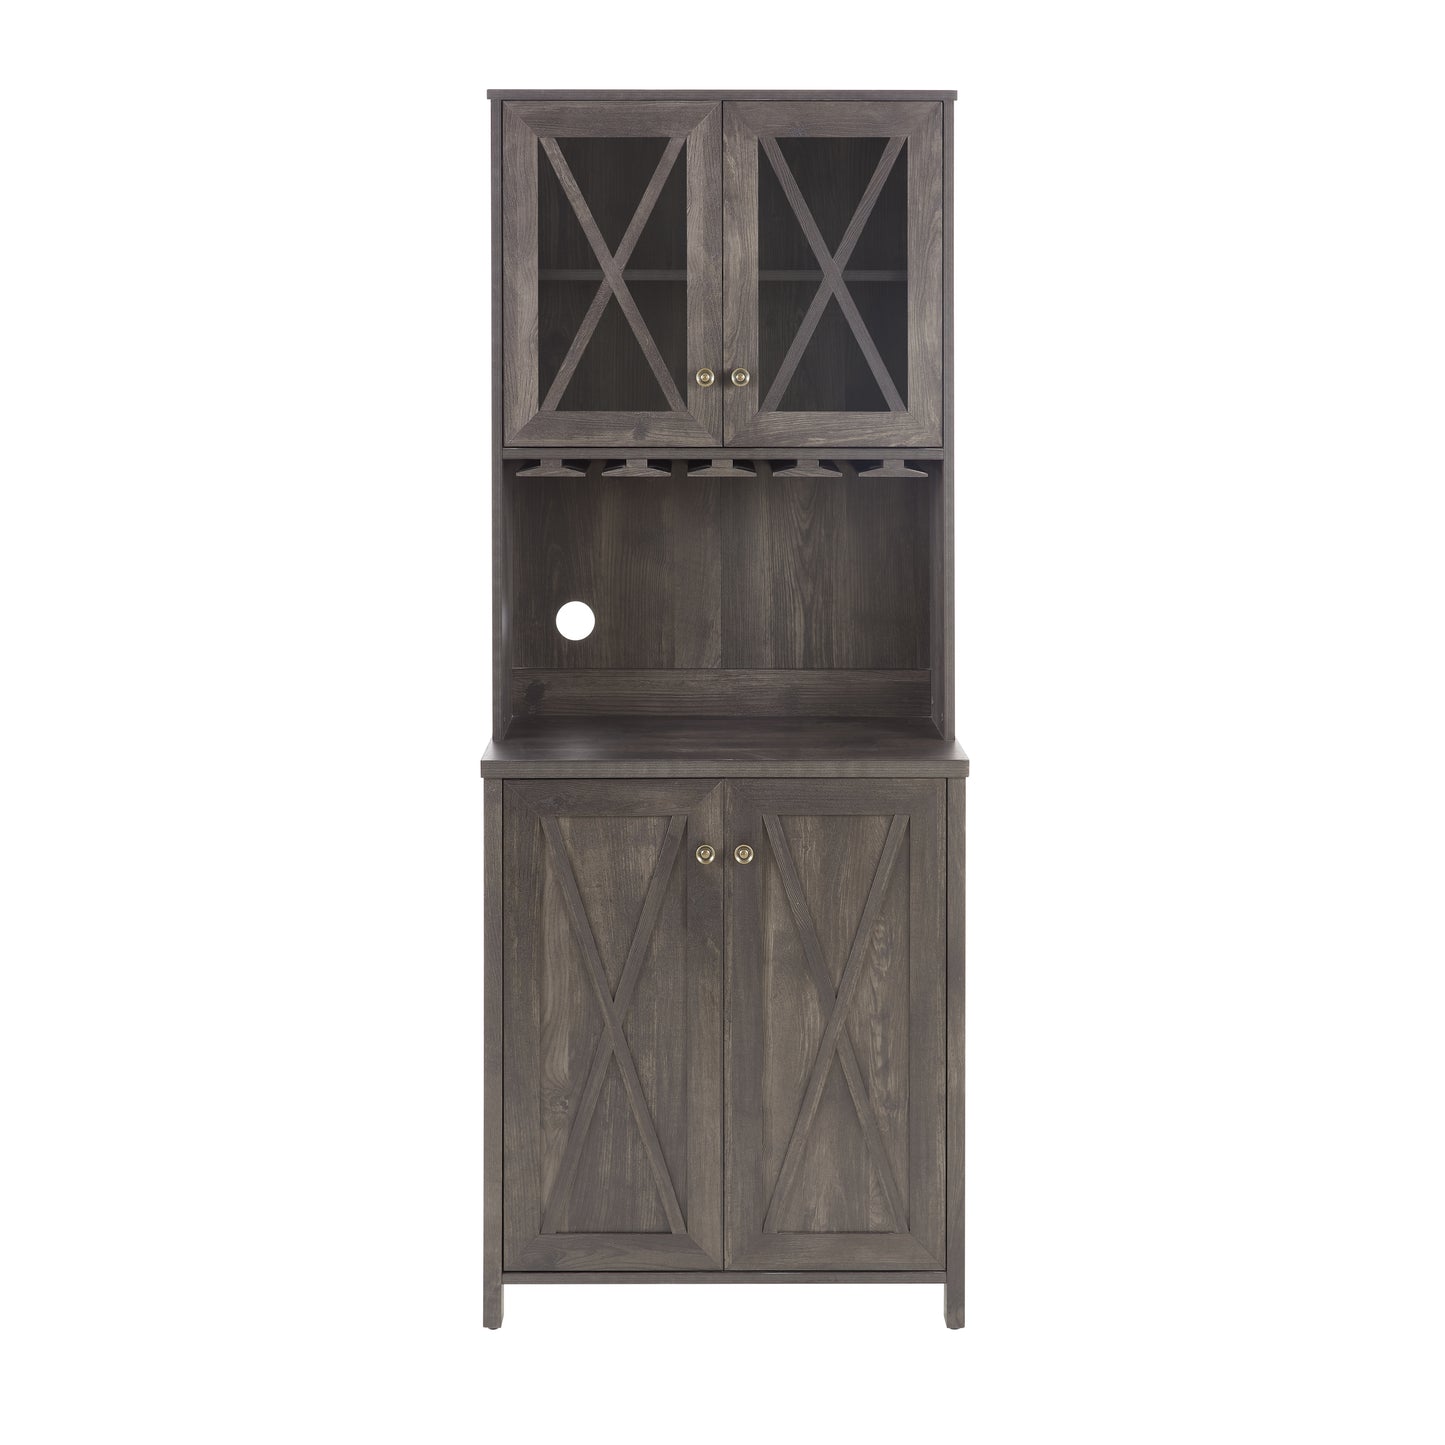 Farmhouse Bar Cabinet for Liquor and Glasses, Dining Room Kitchen Cabinet with Wine Rack, Sideboards Buffets Bar Cabinet L26.89''*W15.87''*H67.3'' Charcoal Grey